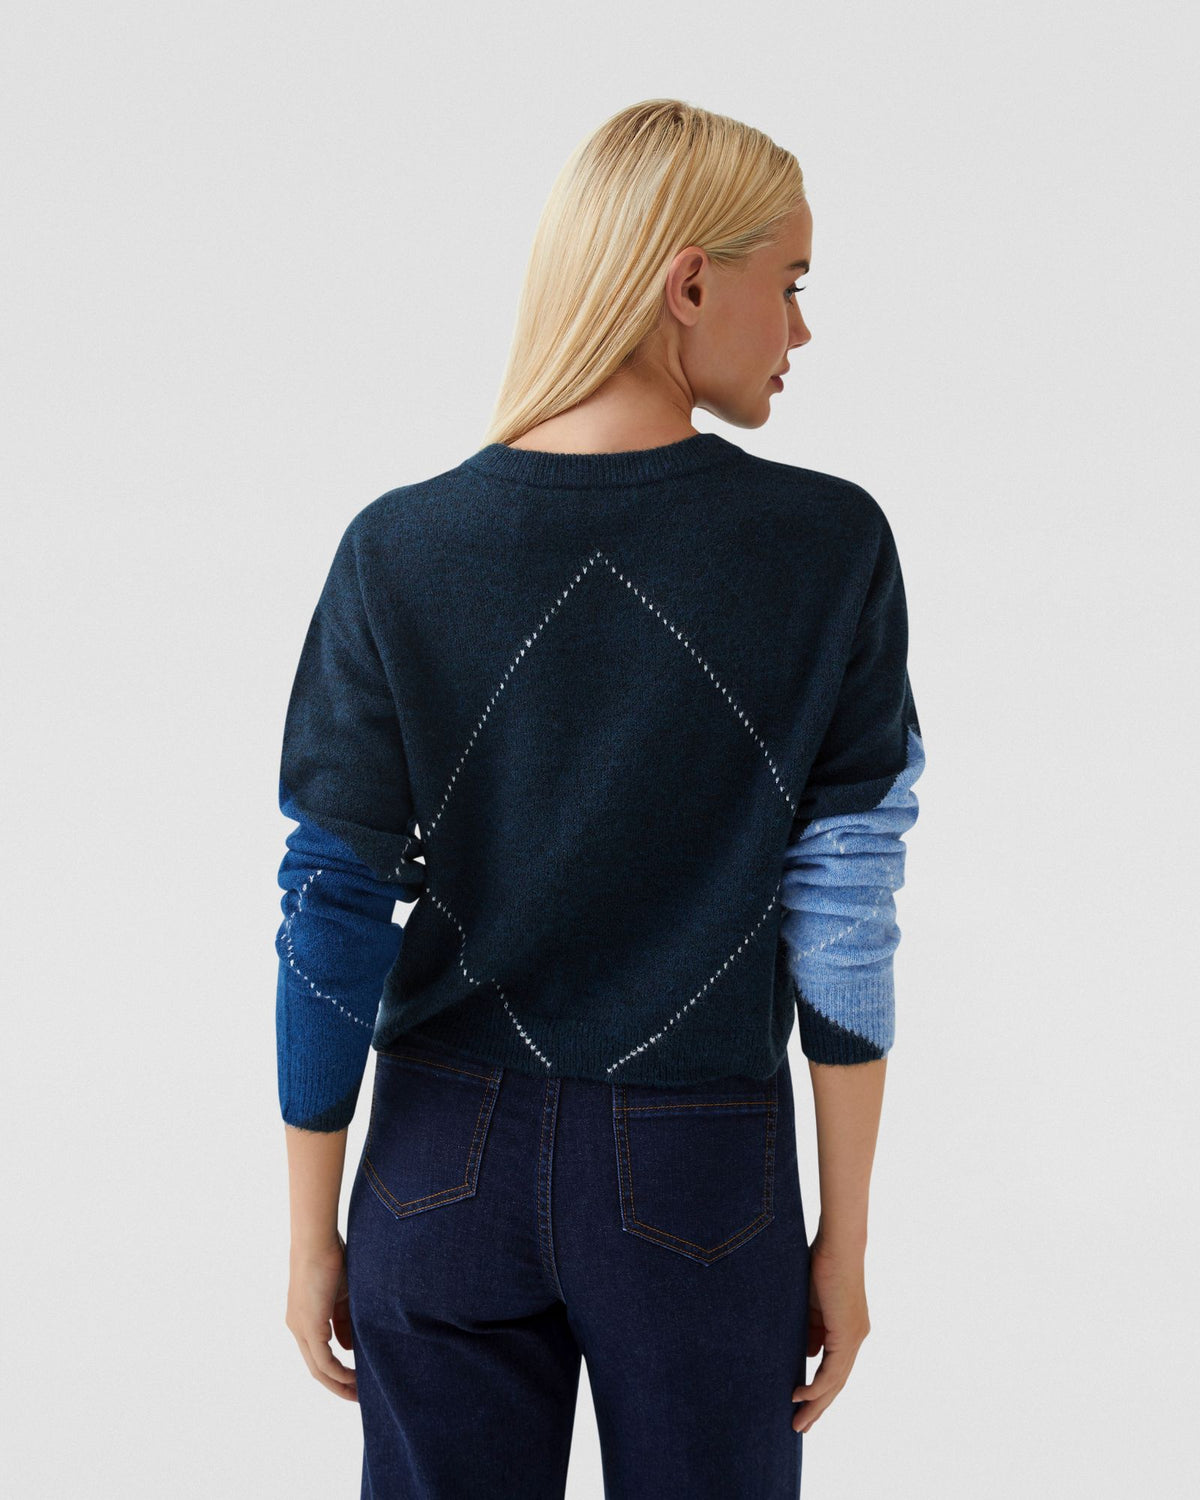 LOWEN ARGYLE V-NECK KNIT - AVAILABLE ~ 1-2 weeks WOMENS KNITWEAR